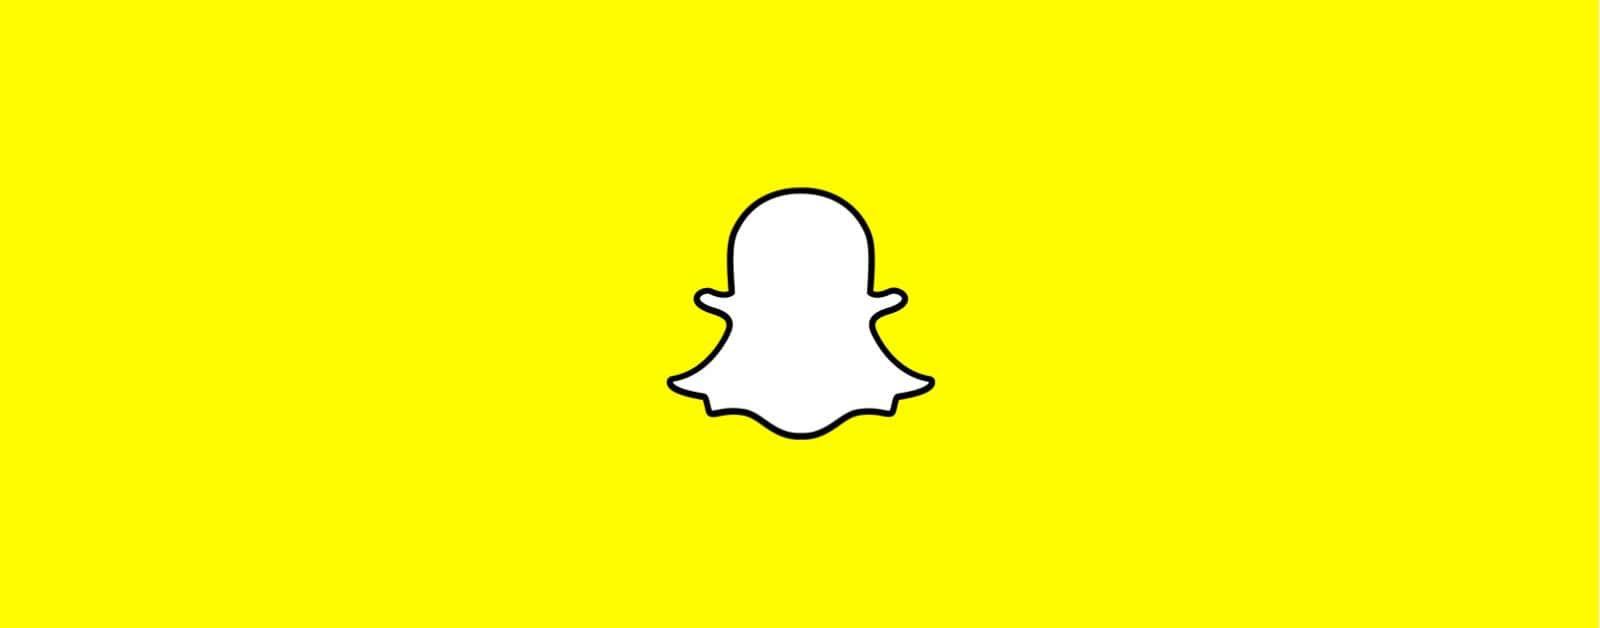 Snapchat Adds 2 New Features: Tint Brush and Multi-Snap